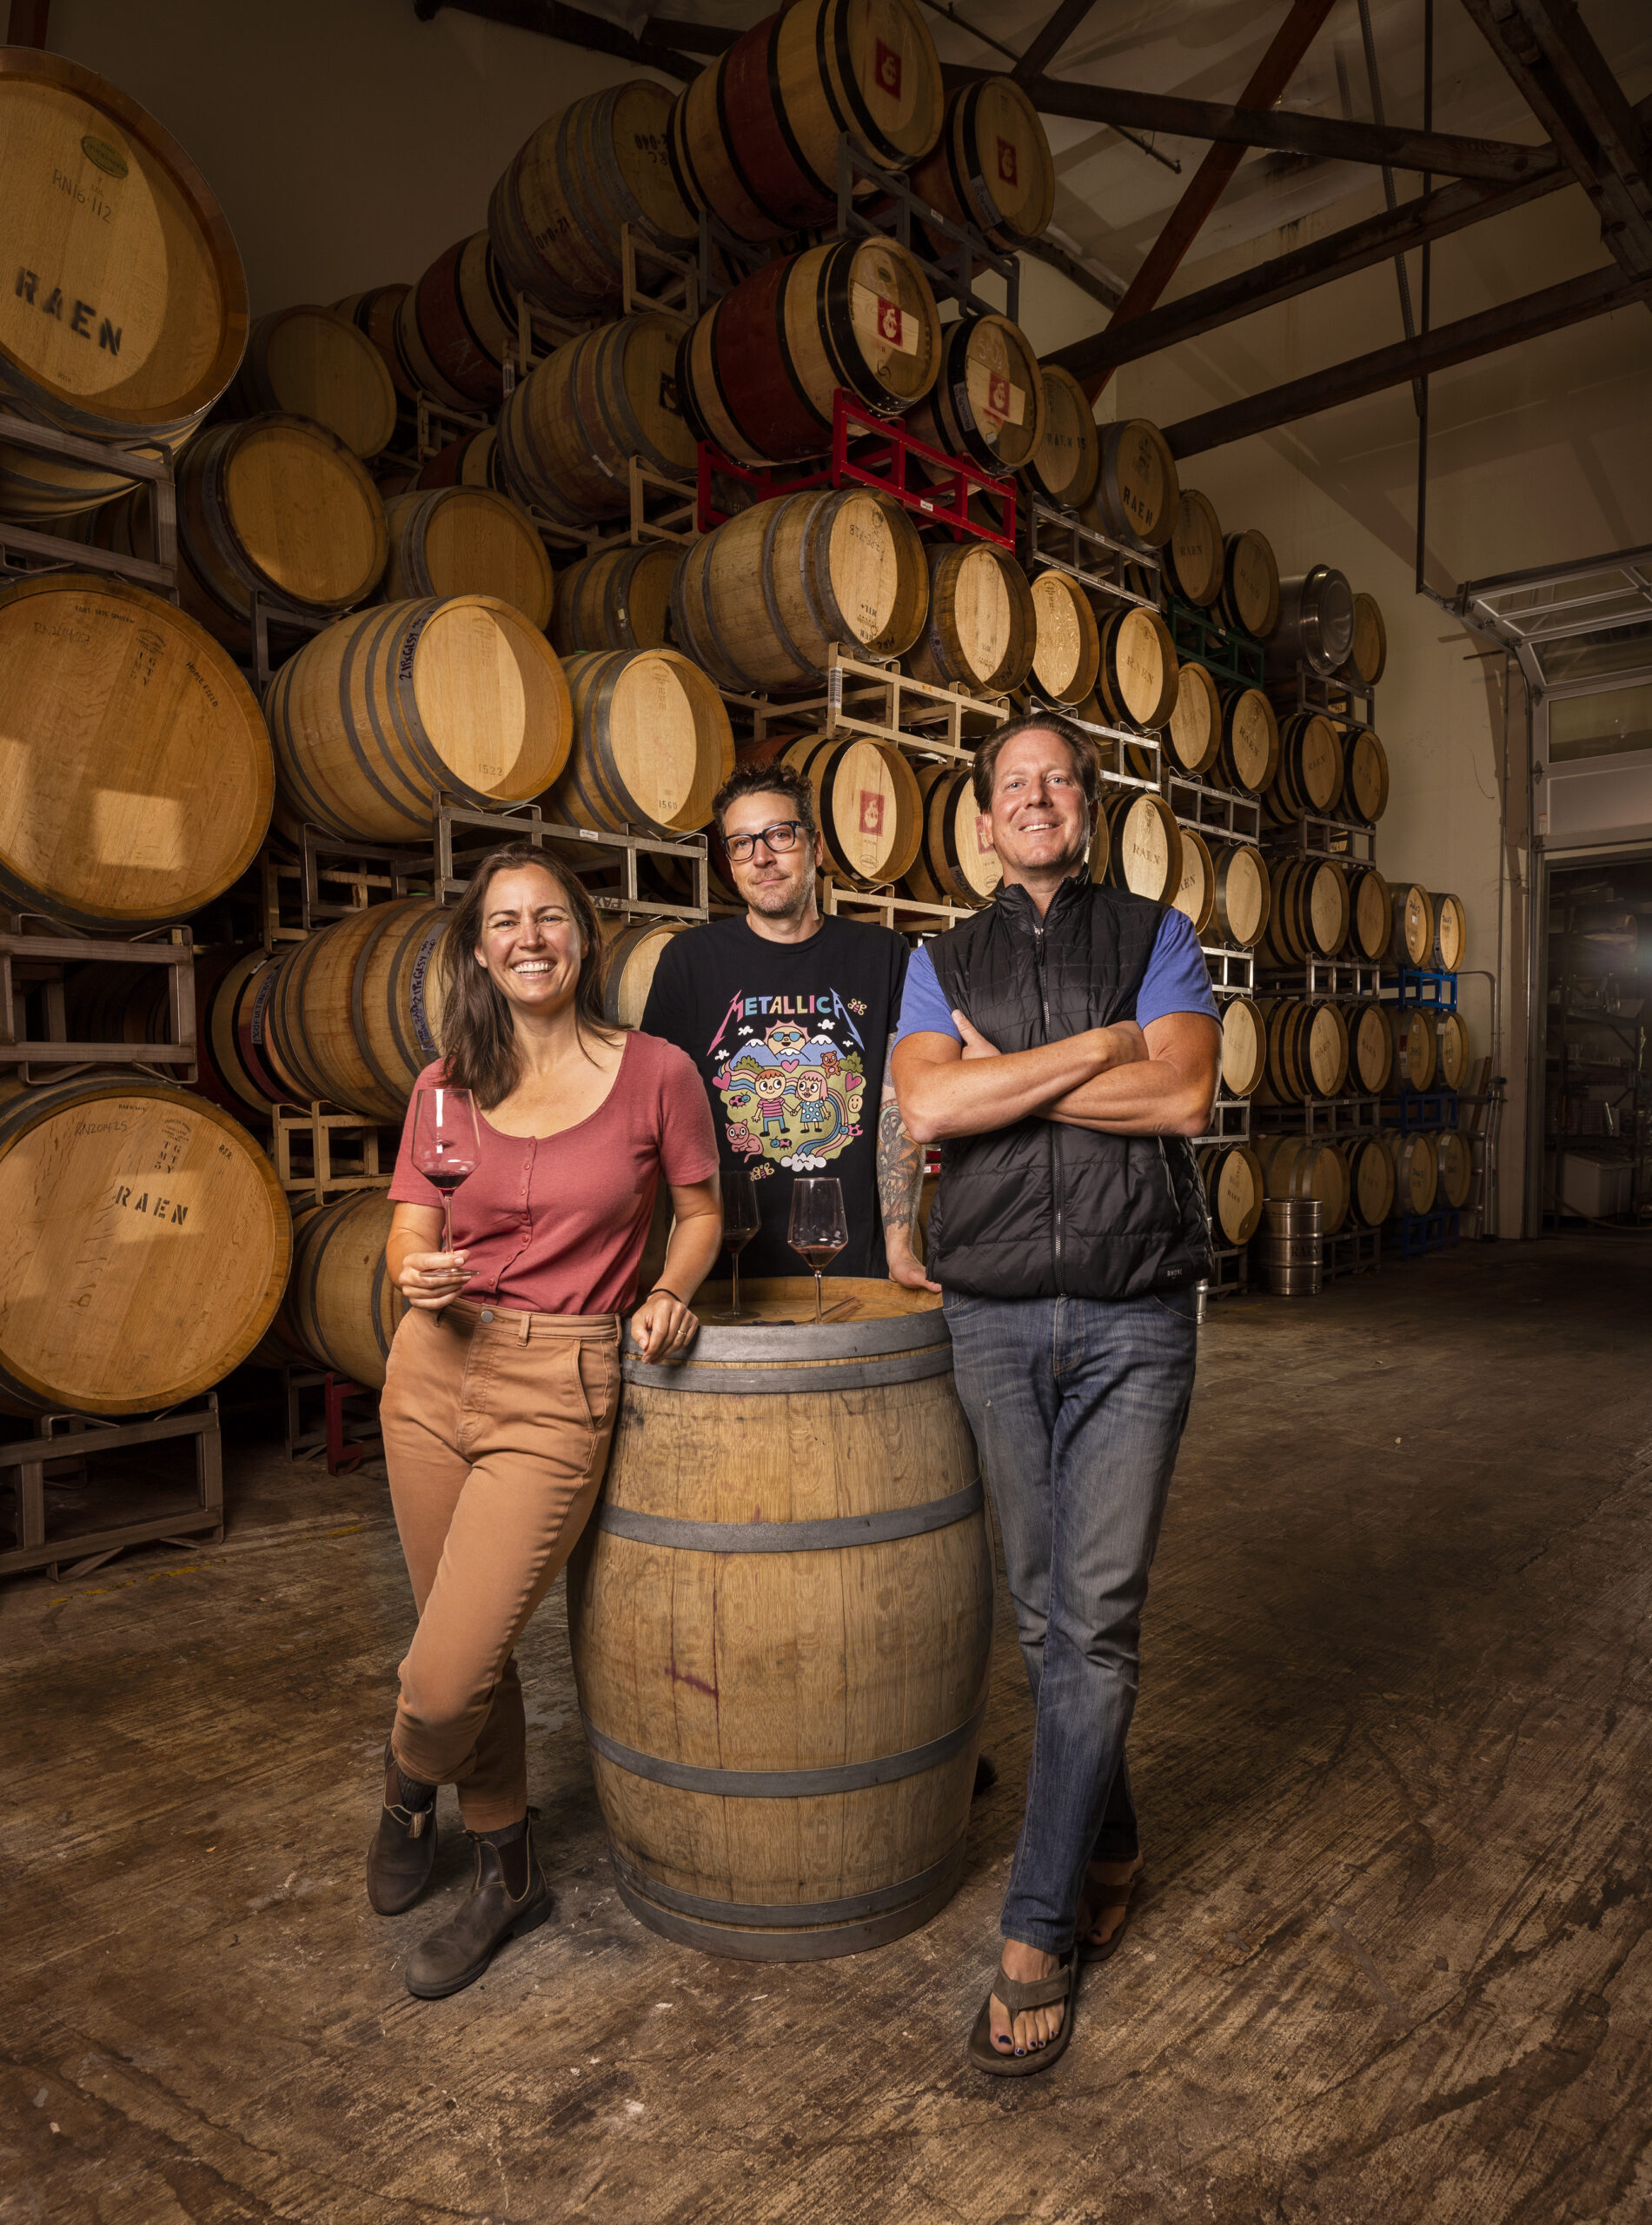 From left, Martha Stoume, owner Martha Stoumen Wines, Patrick Cappiello, owner Monte Rio Cellarsa and Pax Mahle share their knowledge and the Pax winemaking facility at The Barlow in Sebastopol. (John Burgess/Sonoma Magazine)